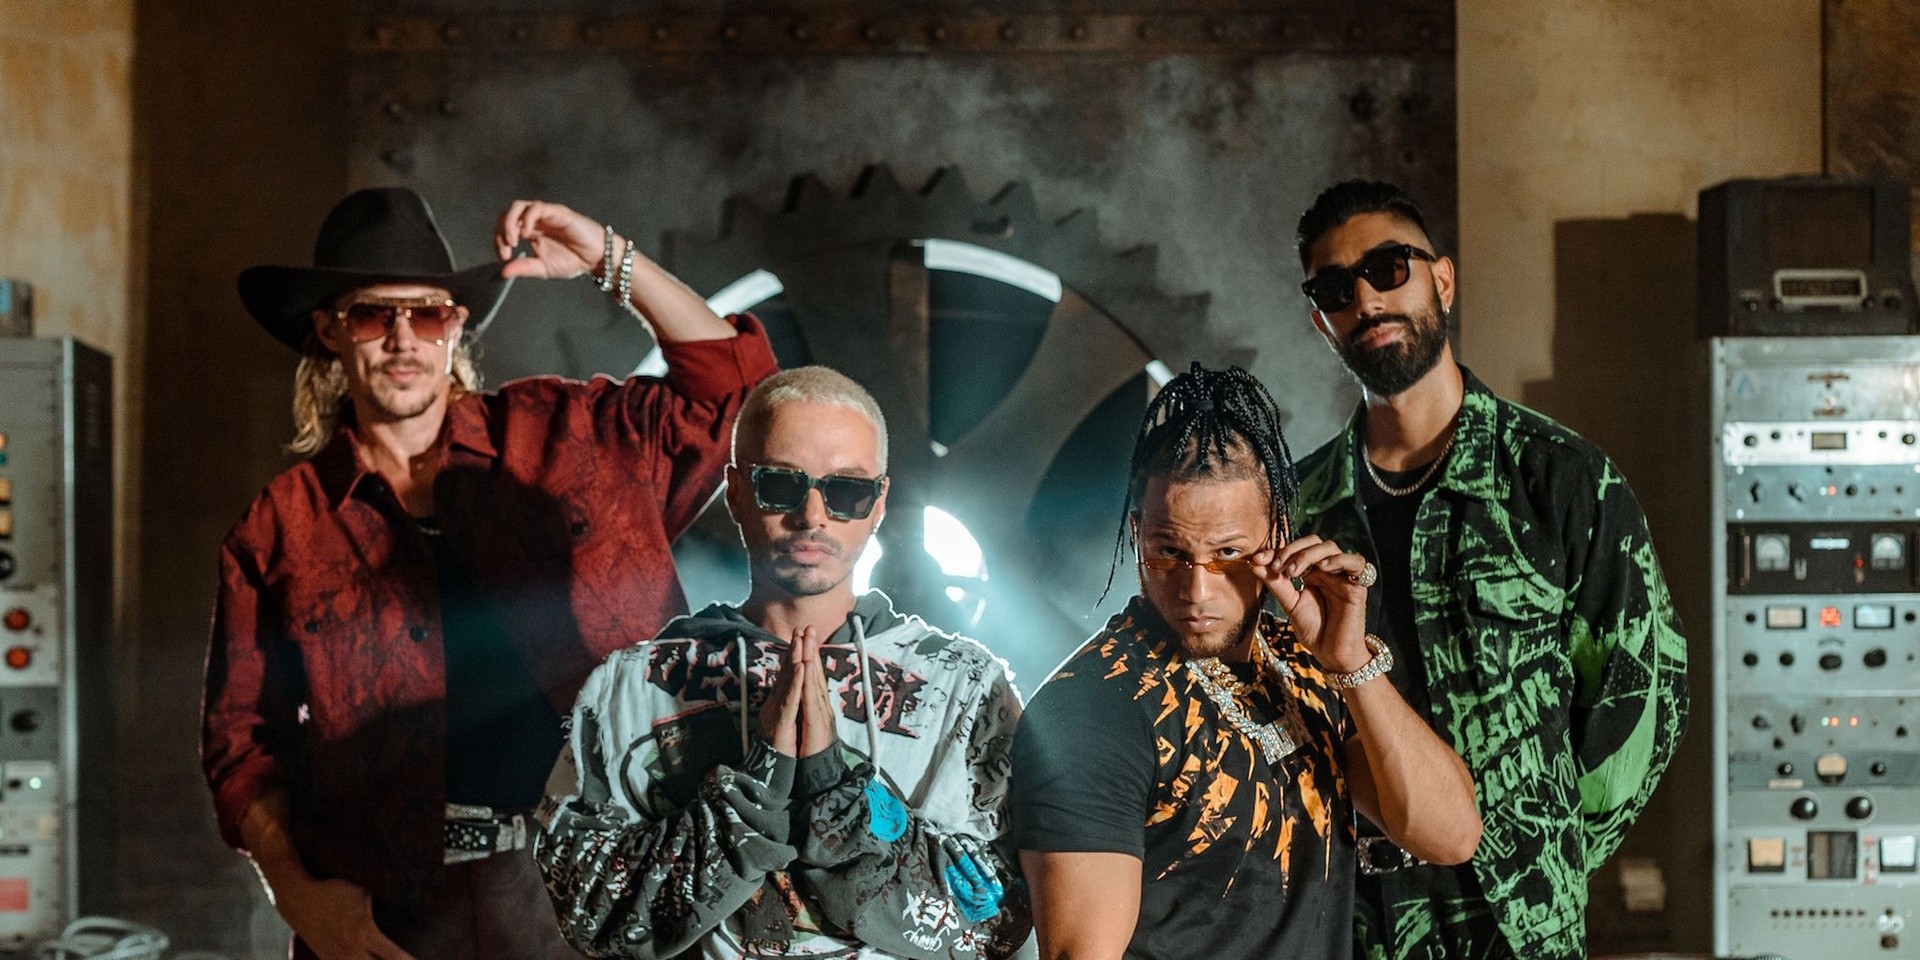 Major Lazer share new song and music video 'Que Calor' featuring J Balvin and El Alfa